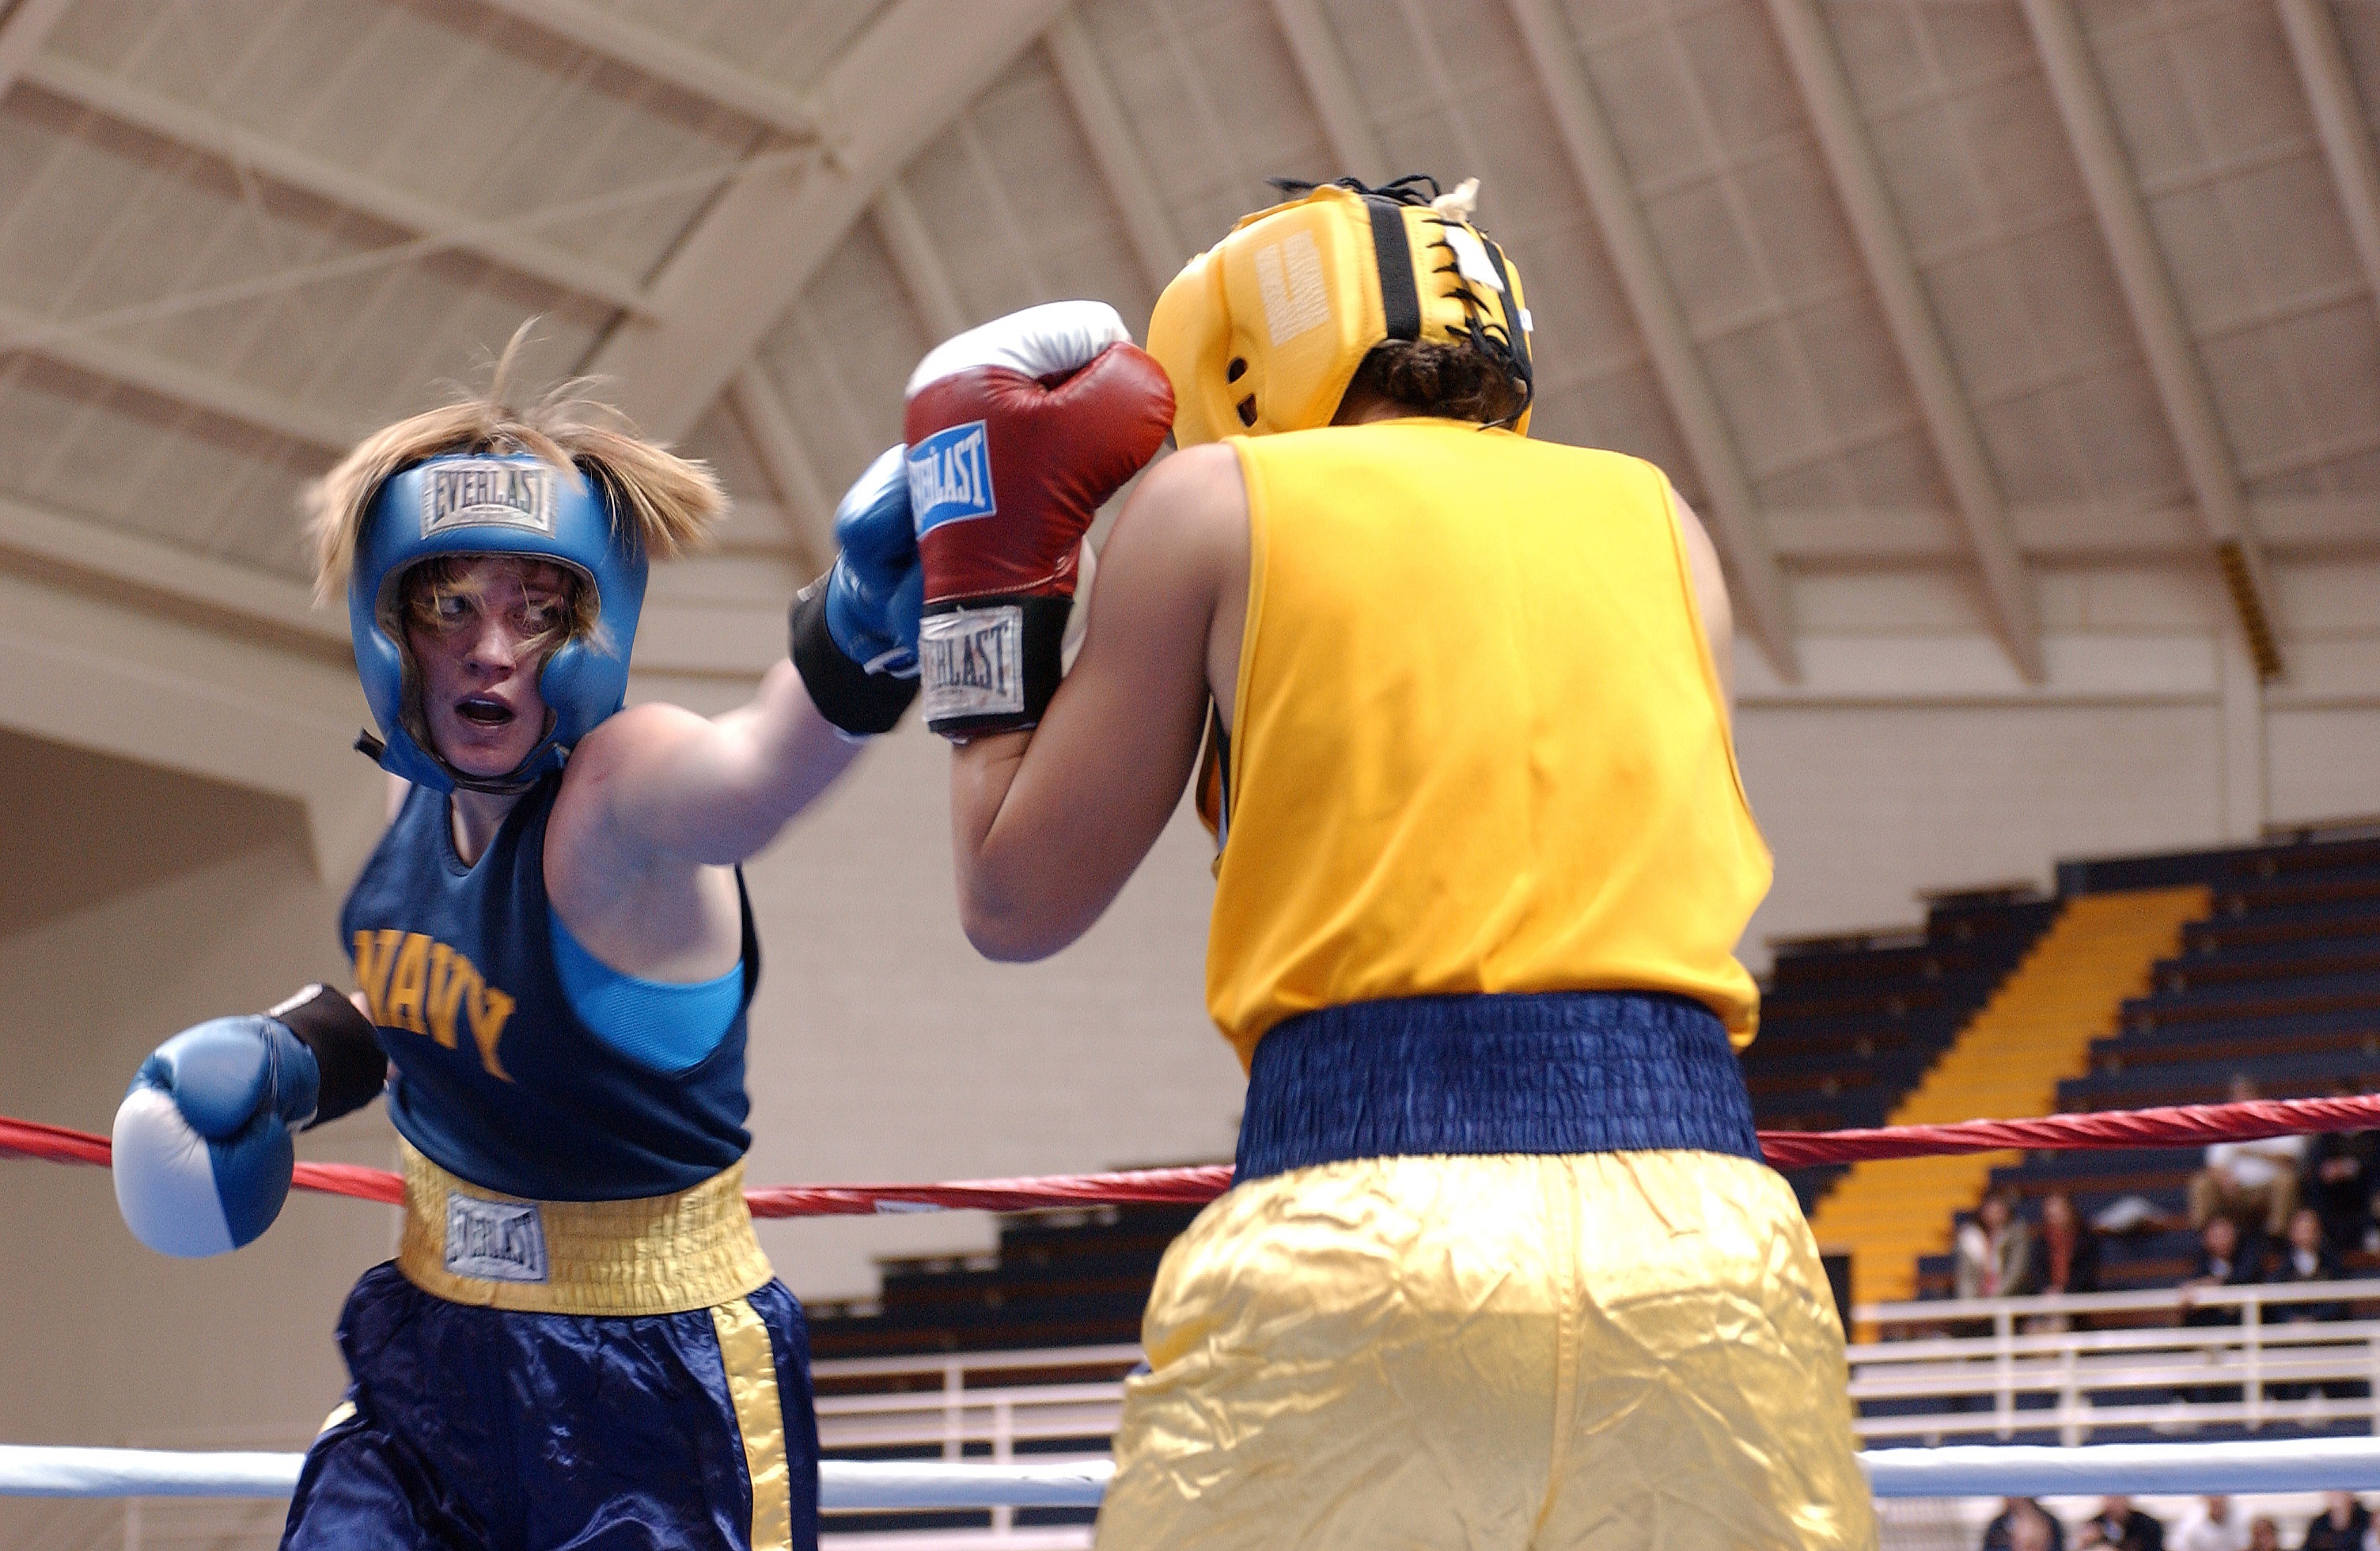 Boxing in the ring photo